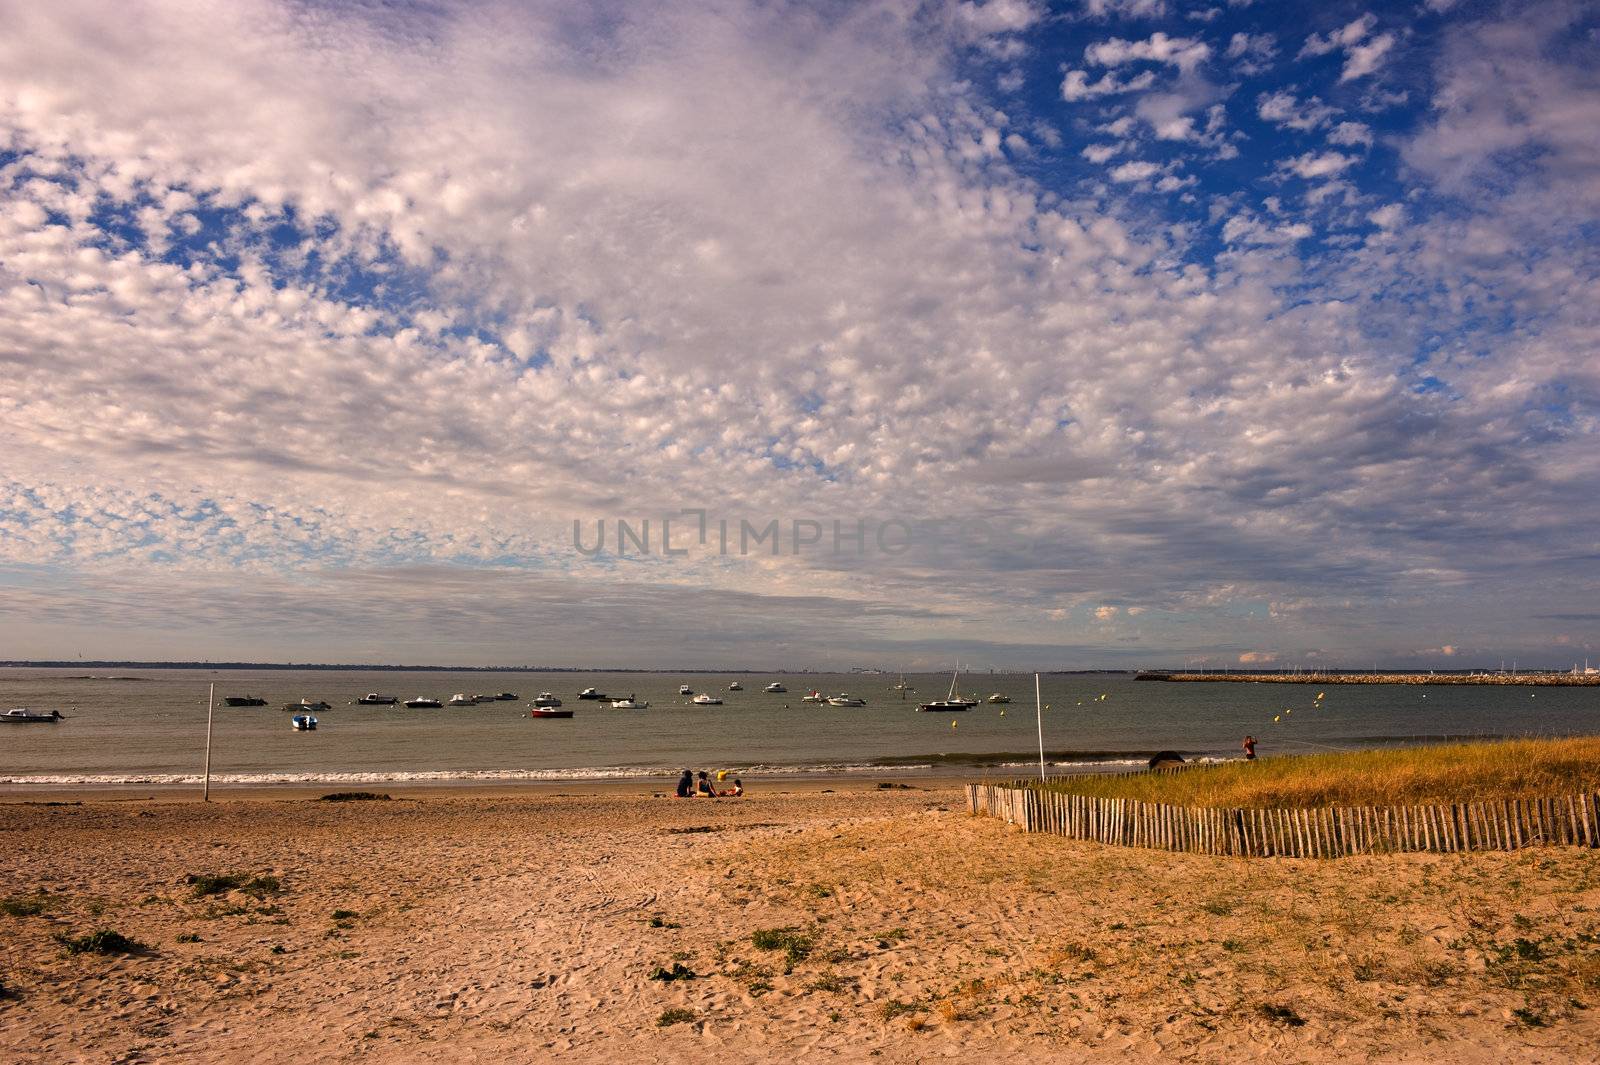 View over sandy beach of small boats anchored off shore against a cloudy sky